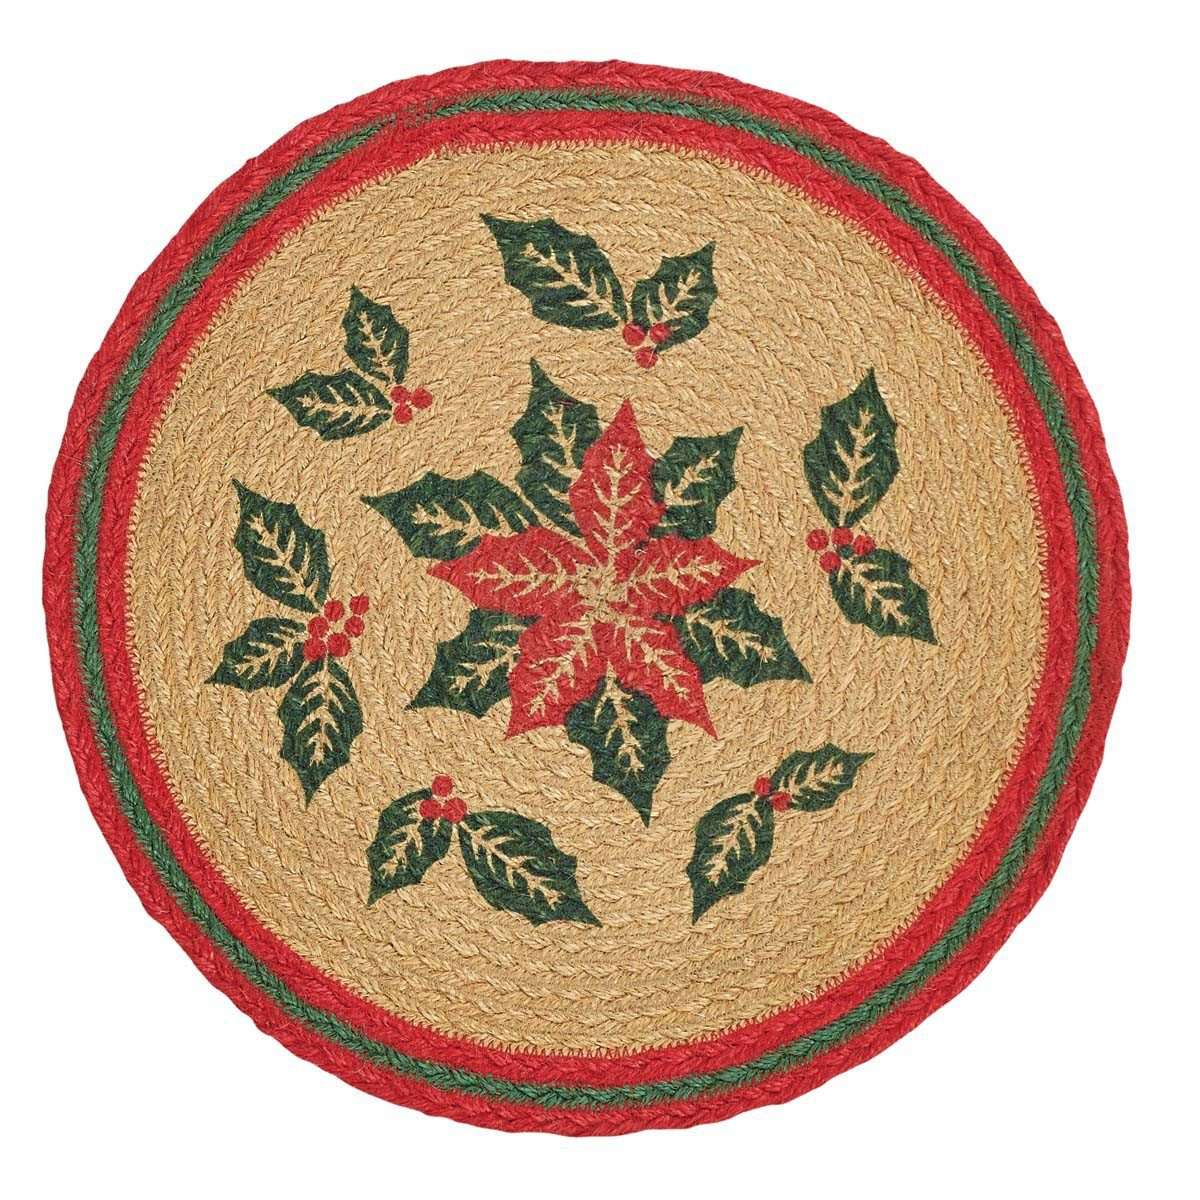 Poinsettia Jute Braided Placemat Round Set of 6 VHC Brands - The Fox Decor